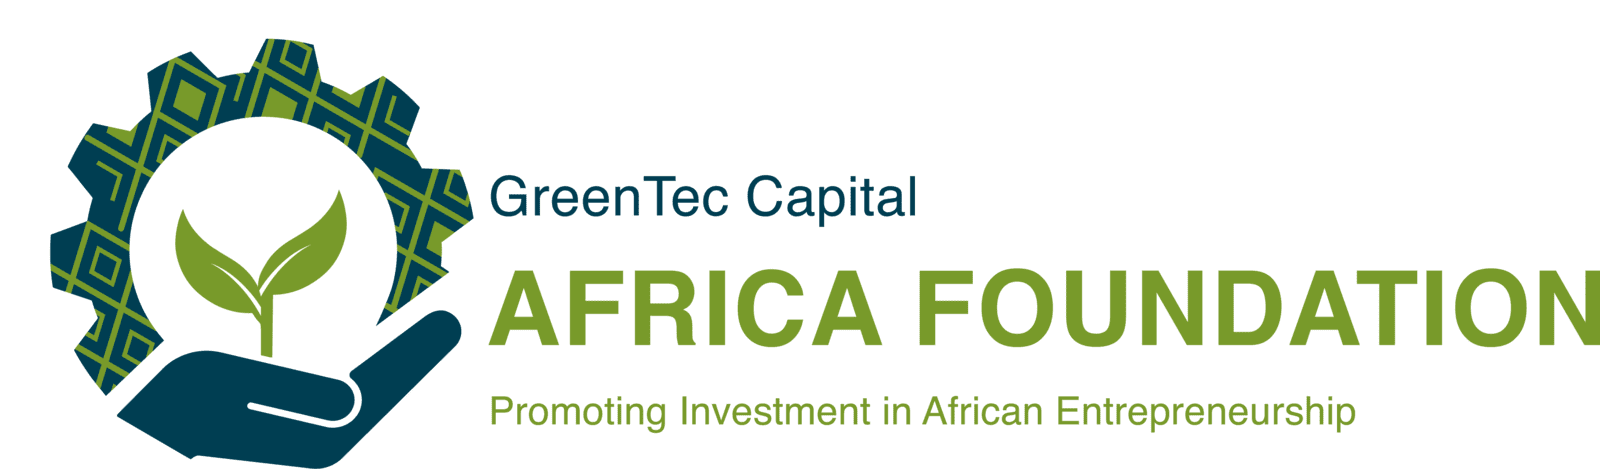 Greentec Capital Partners About Us